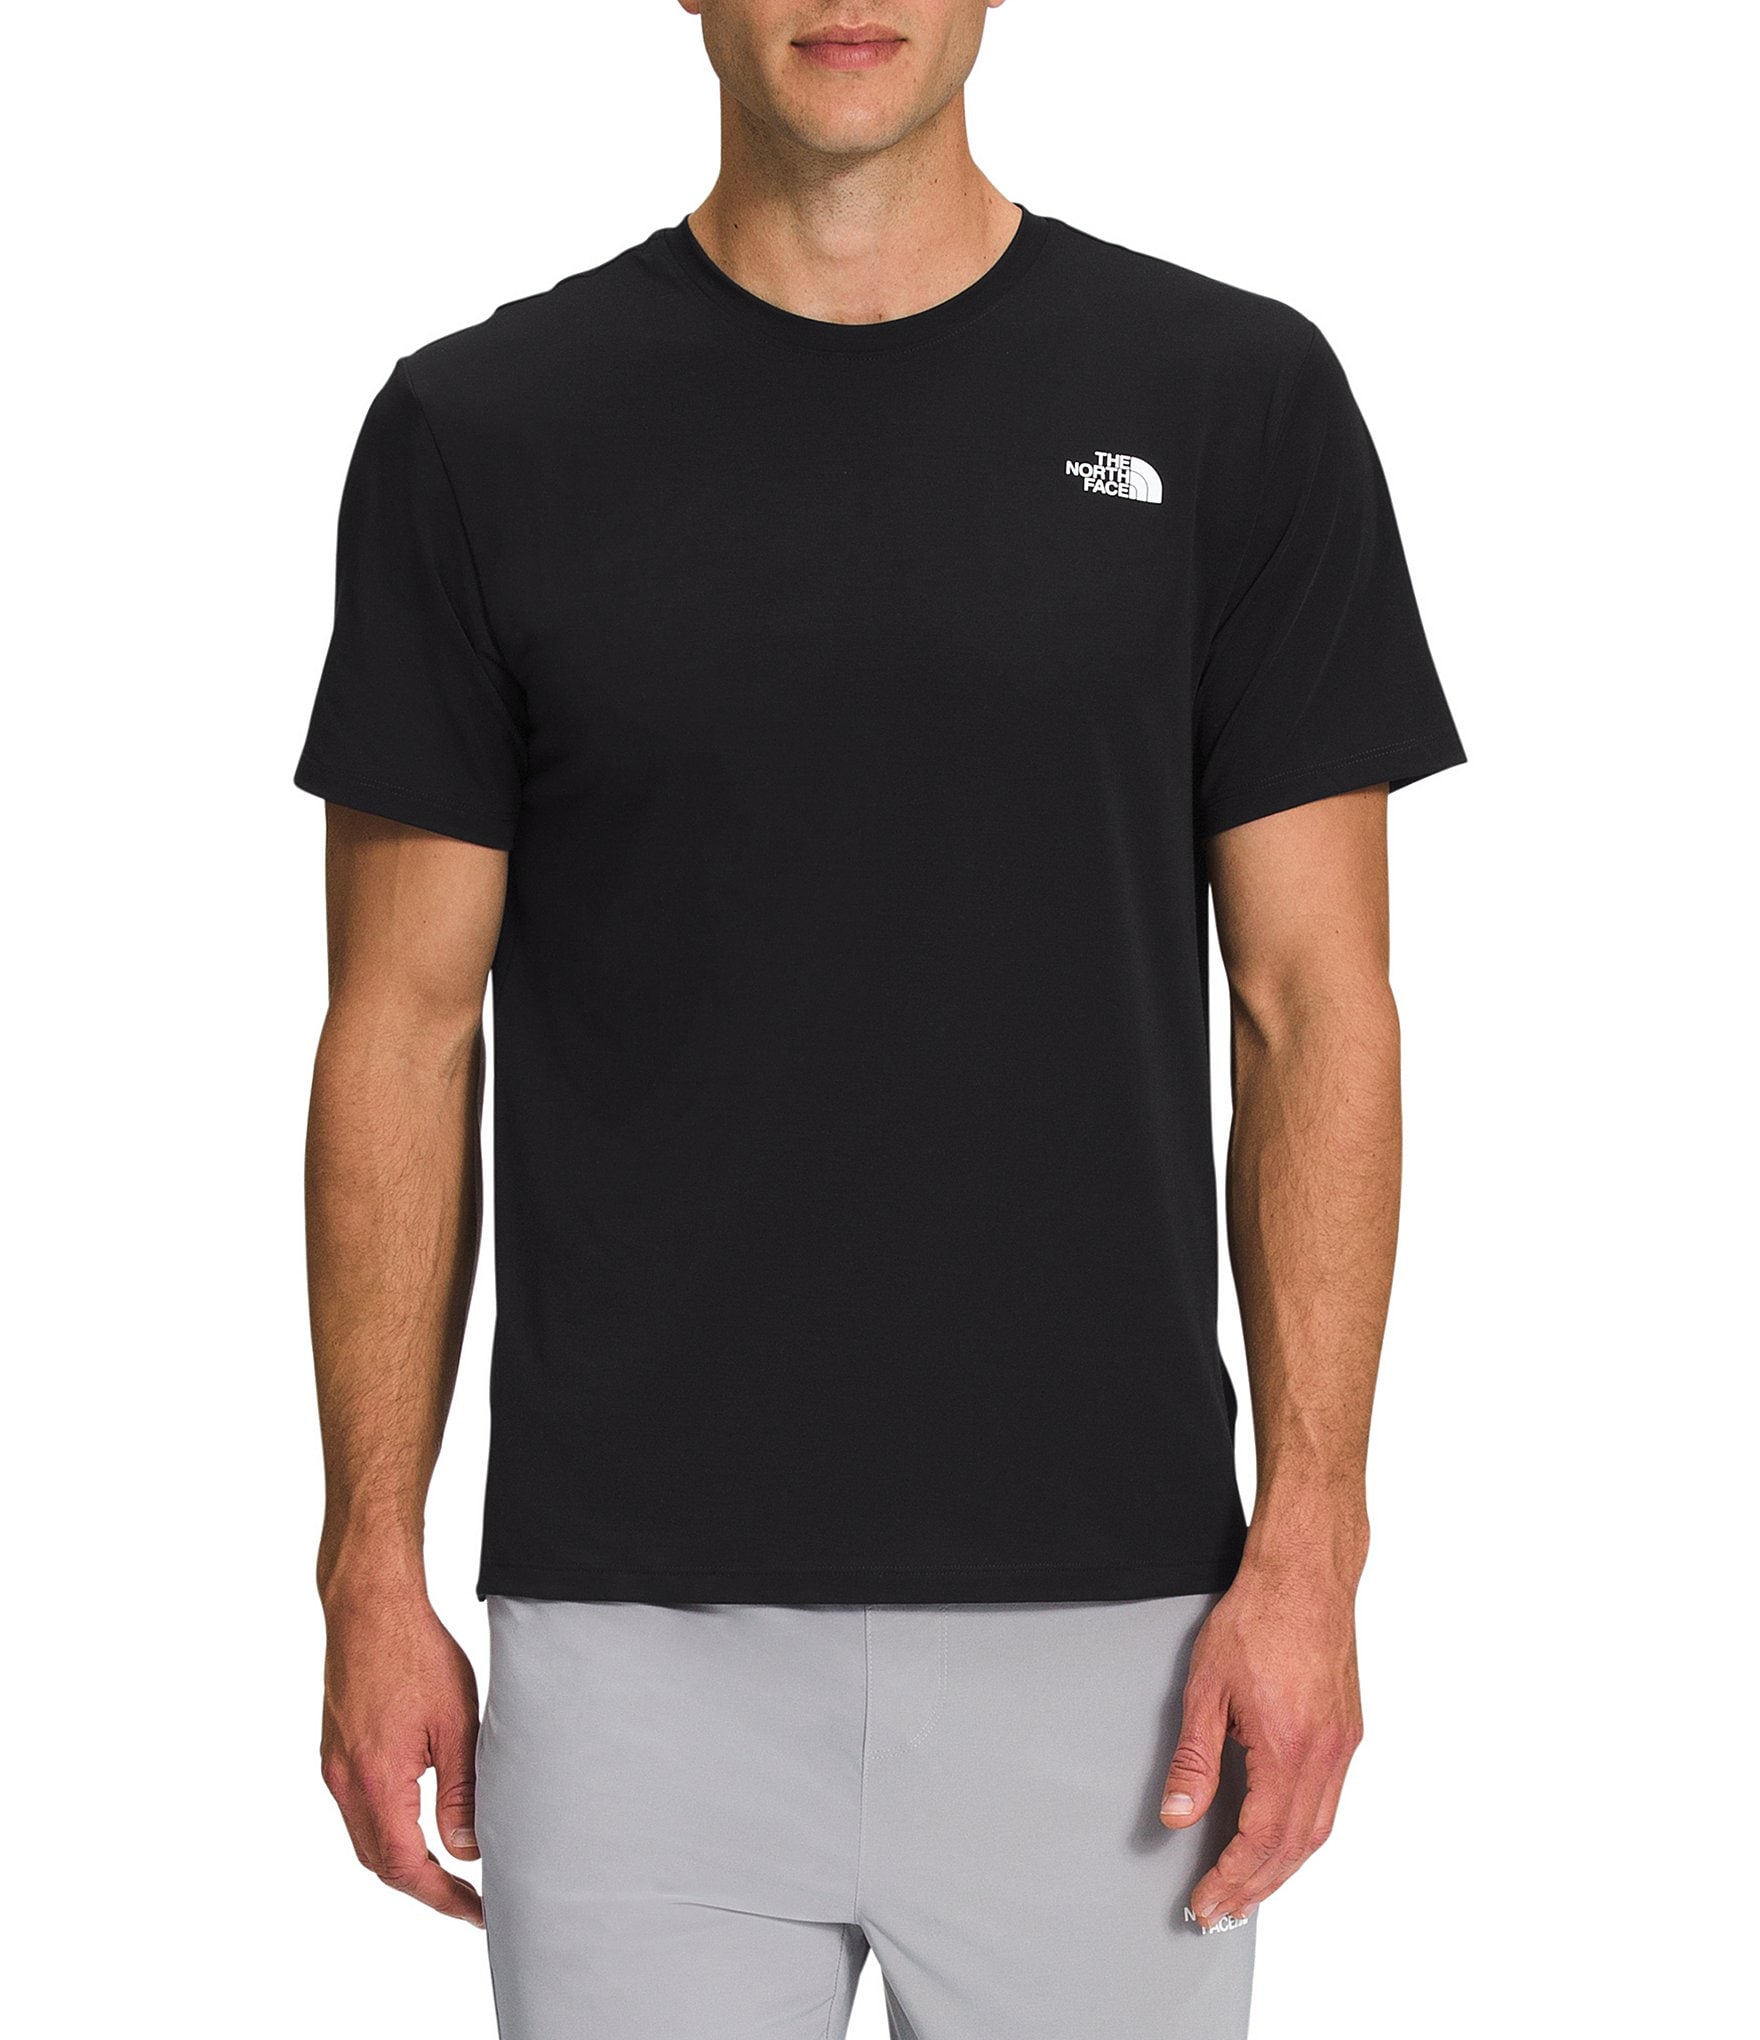 https://dimg.dillards.com/is/image/DillardsZoom/zoom/the-north-face-short-sleeve-standard-fit-flashdry-wander-tee/00000000_zi_e7f588b3-9fa2-4e4d-92de-b4f58d94beab.jpg